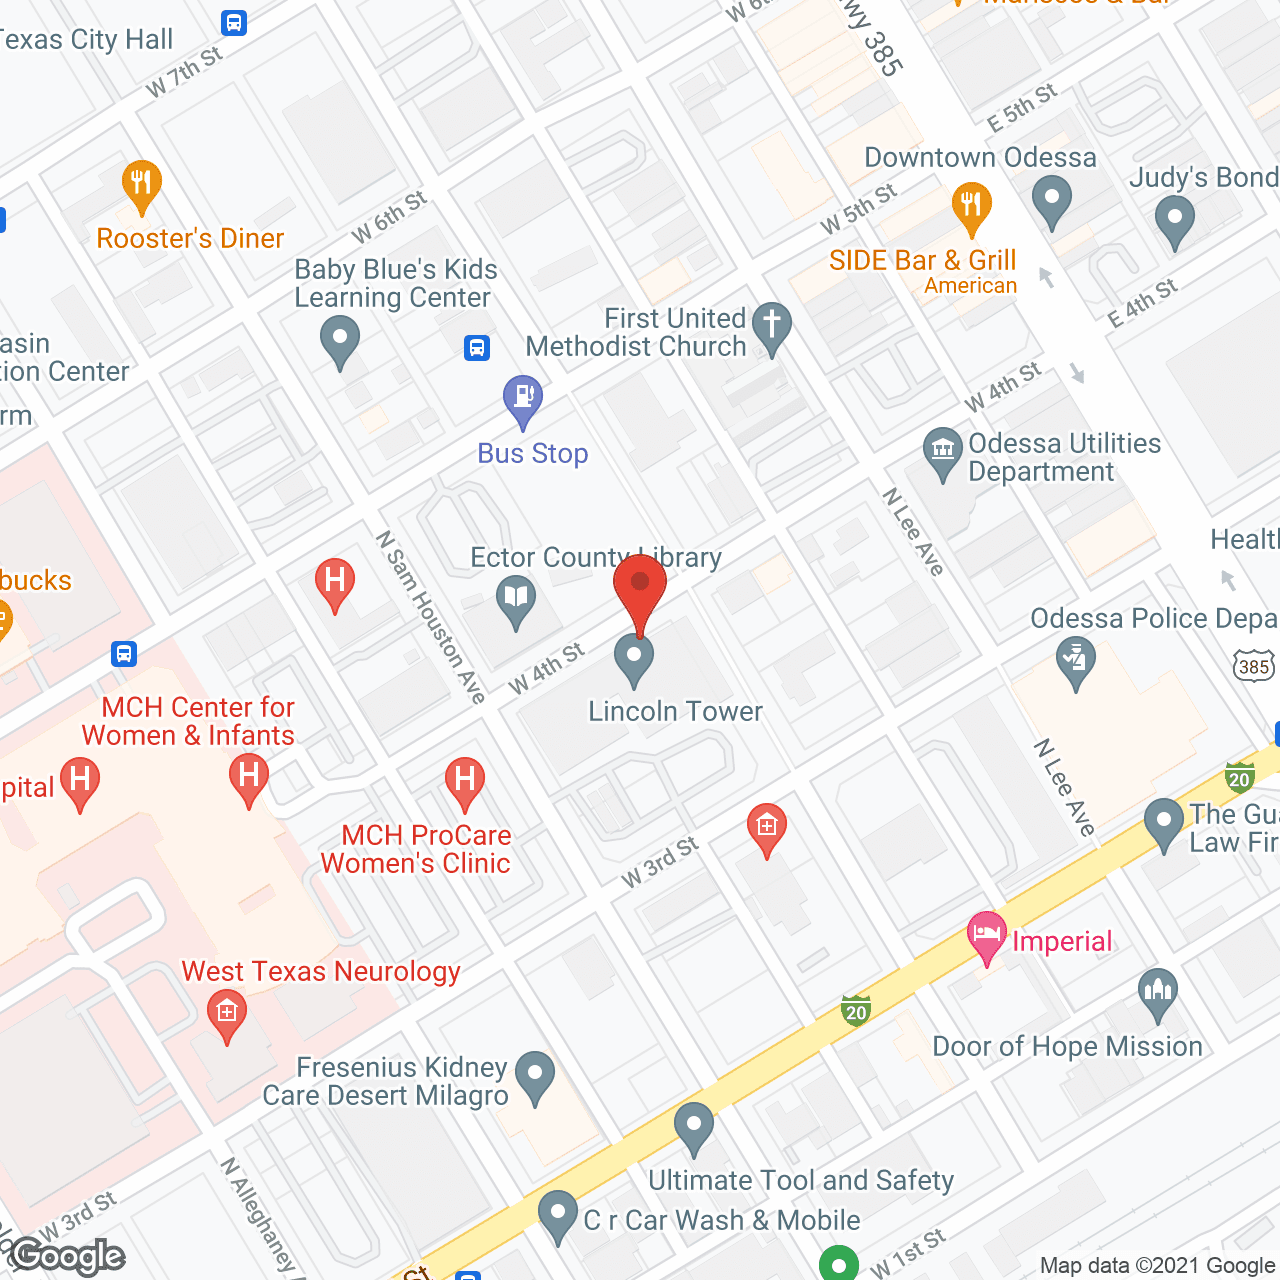 Holiday Lincoln Tower in google map